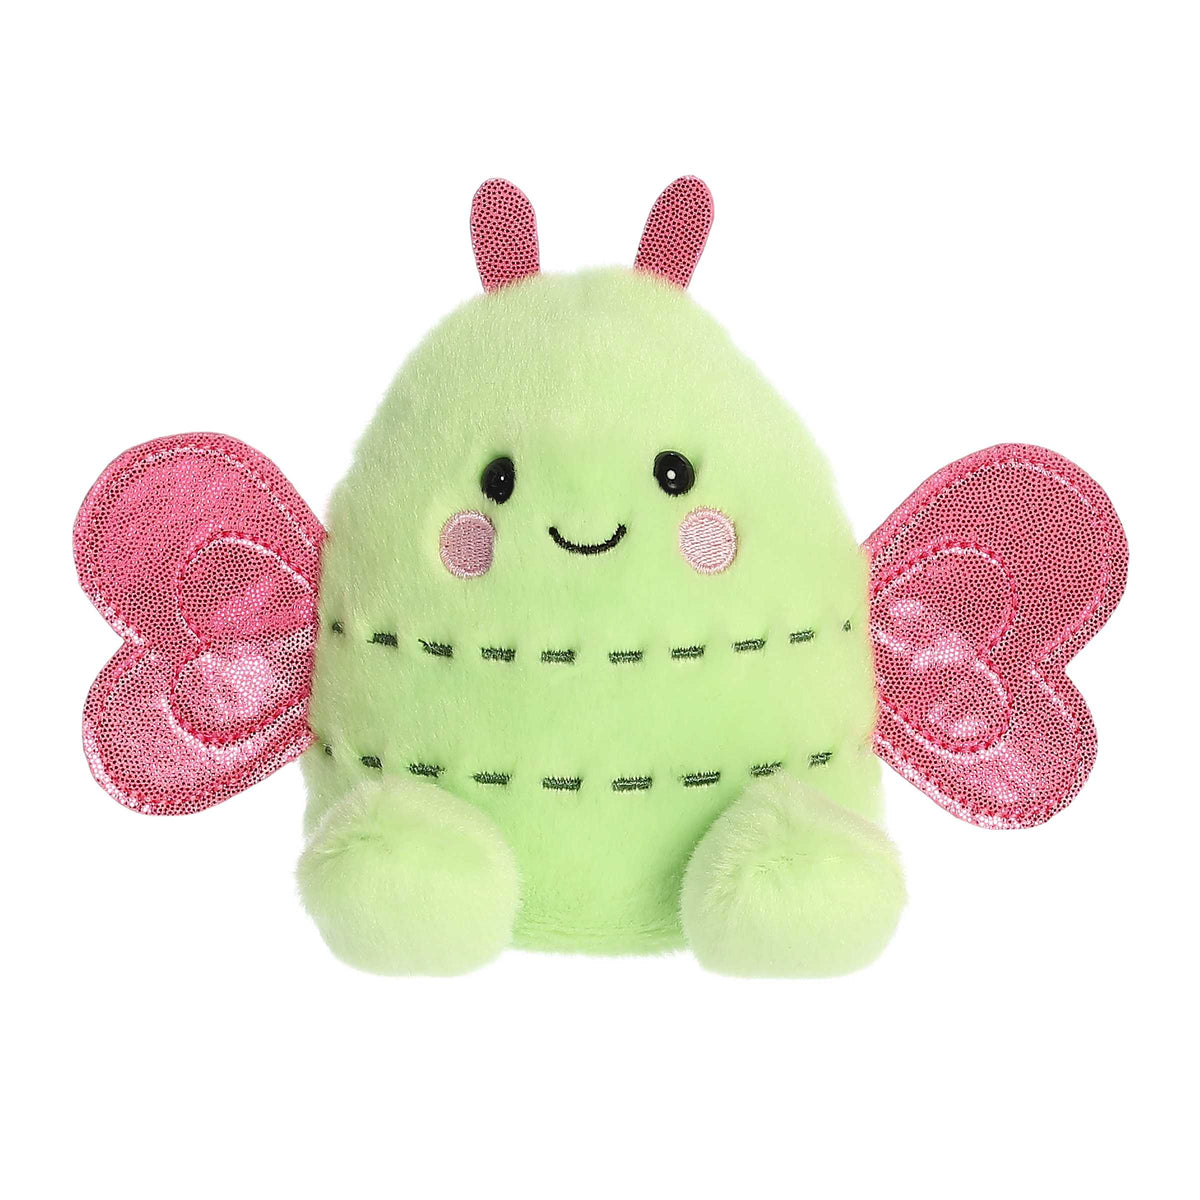 Zephyr Butterfly from Palm Pals, a plush with a gentle smile and calm demeanor